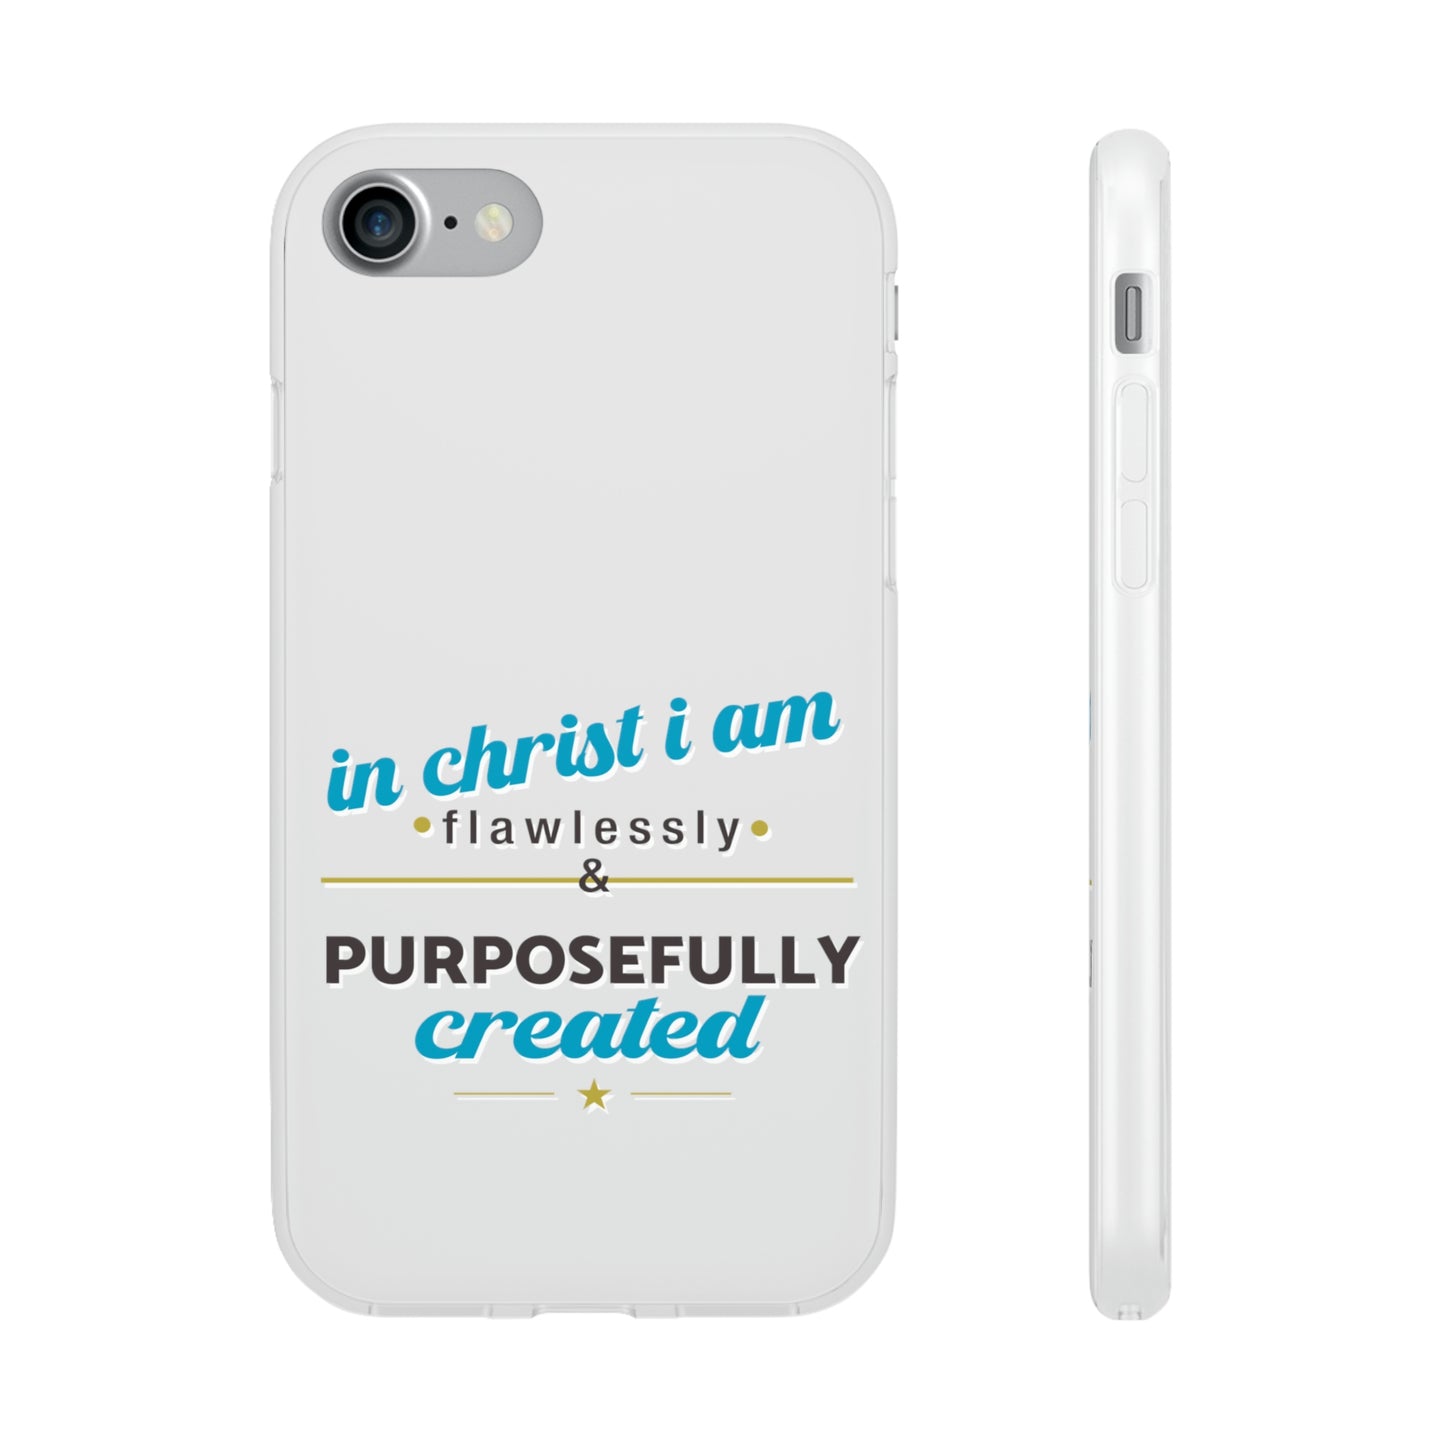 In Christ I Am Flawlessly & Purposefully Created Flexi Phone Case